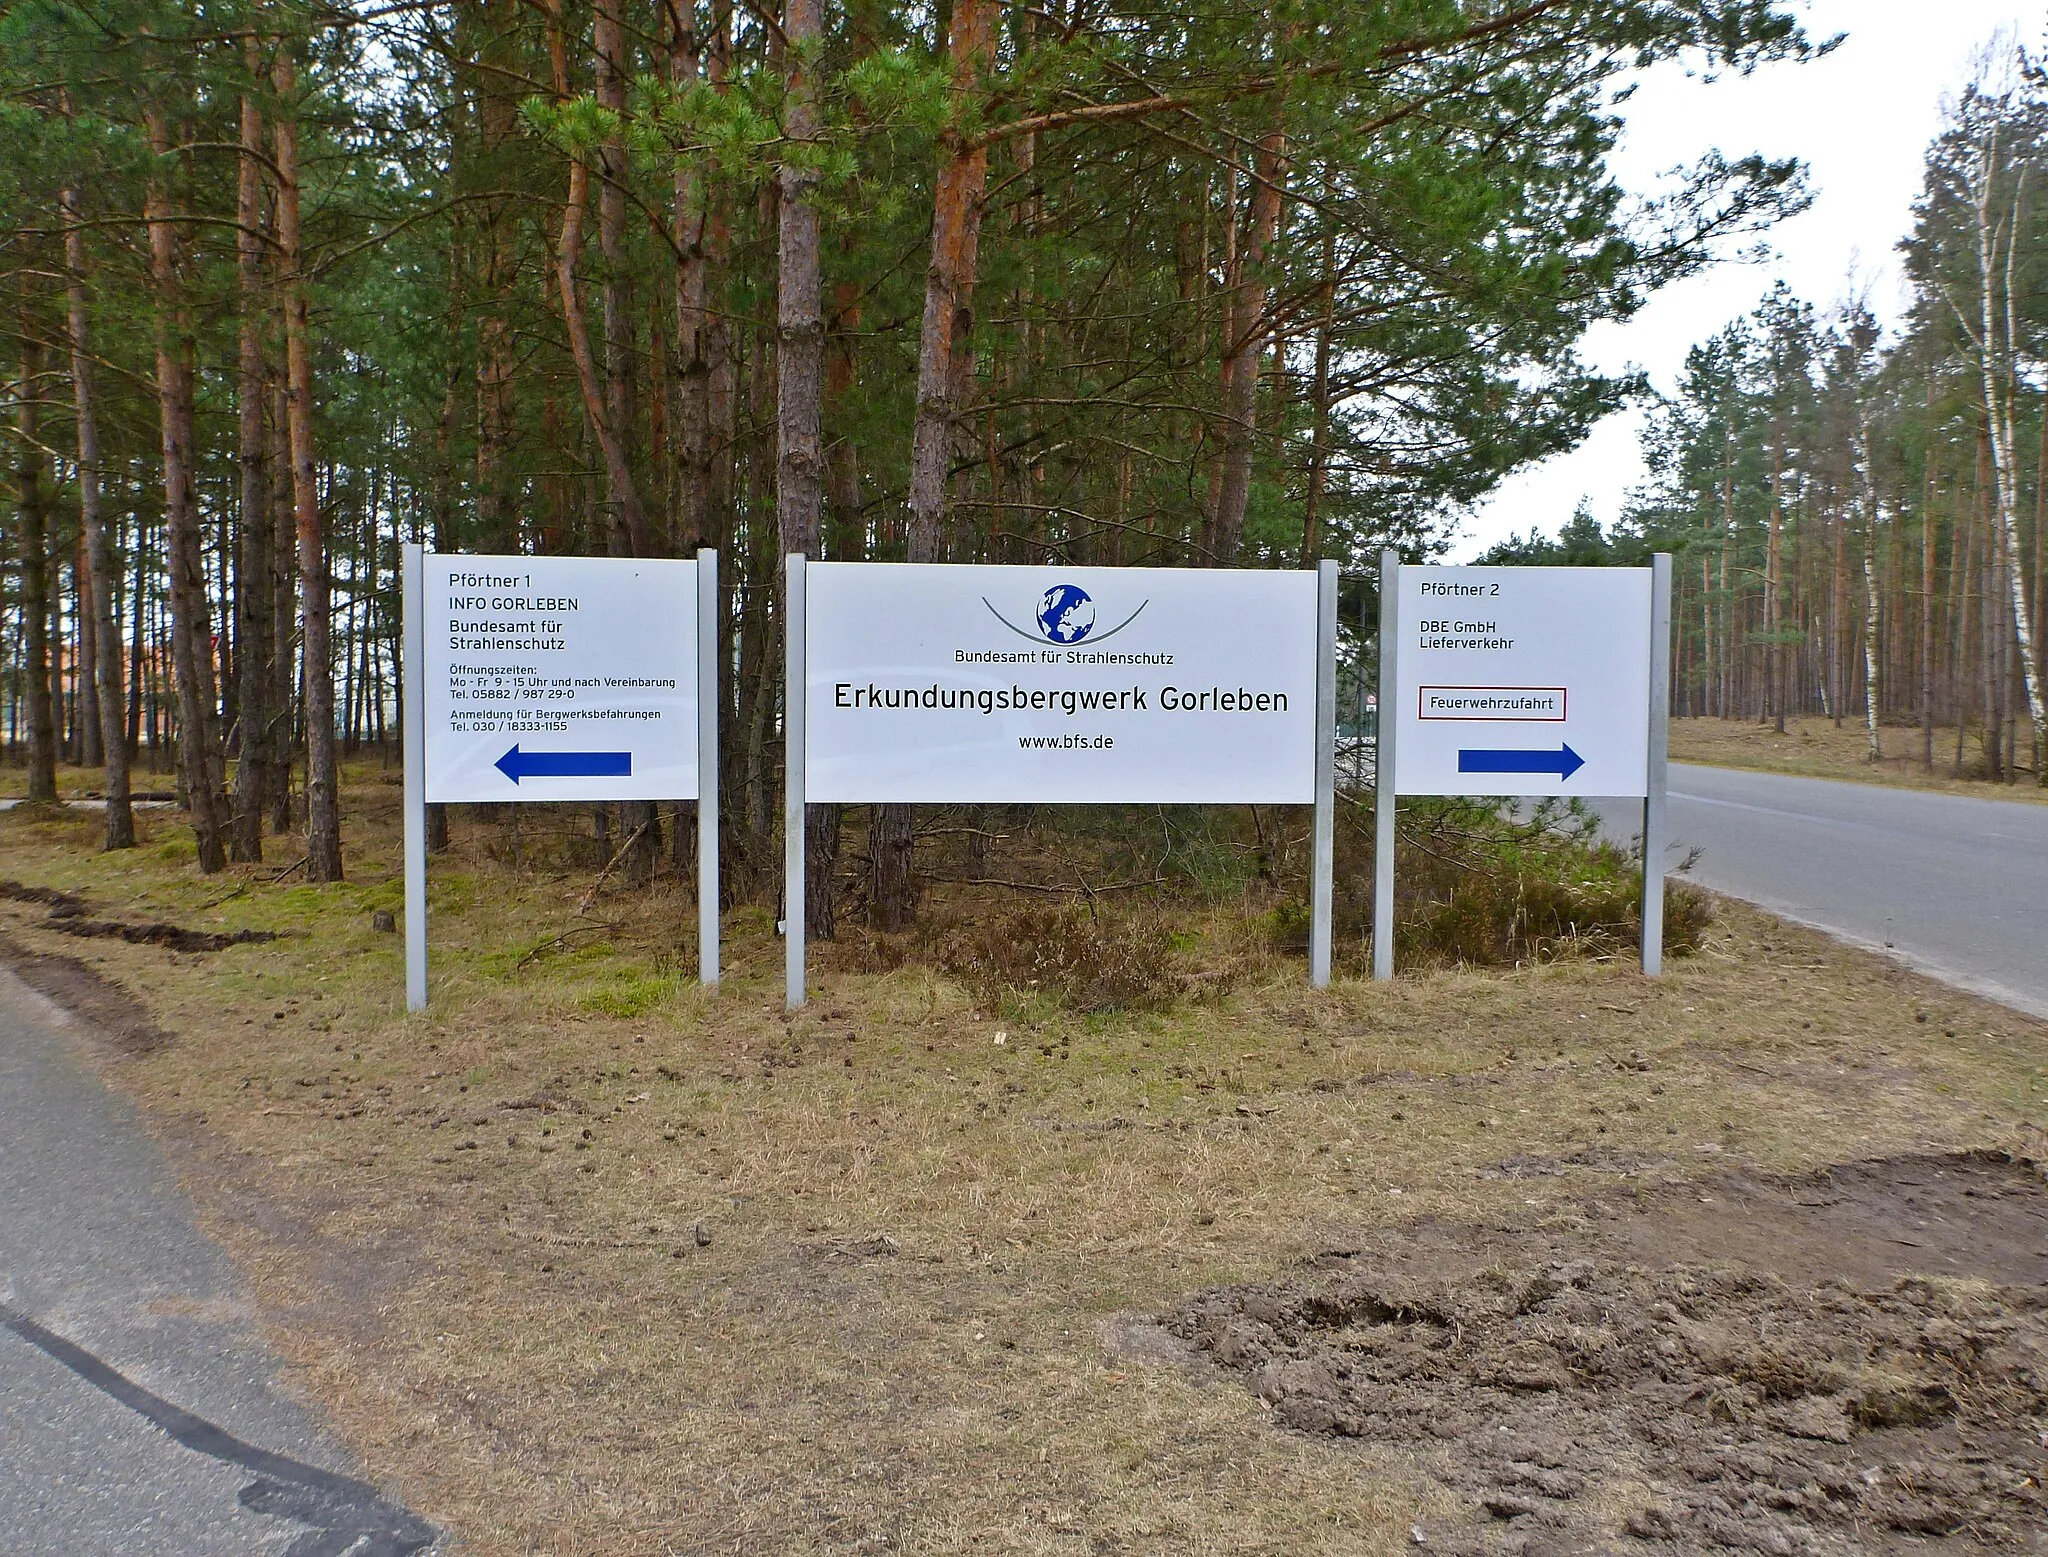 Photo showing: Signs at the Erkundungsbergwerk Gorleben operated by the German Federal Office for Radiation Protection